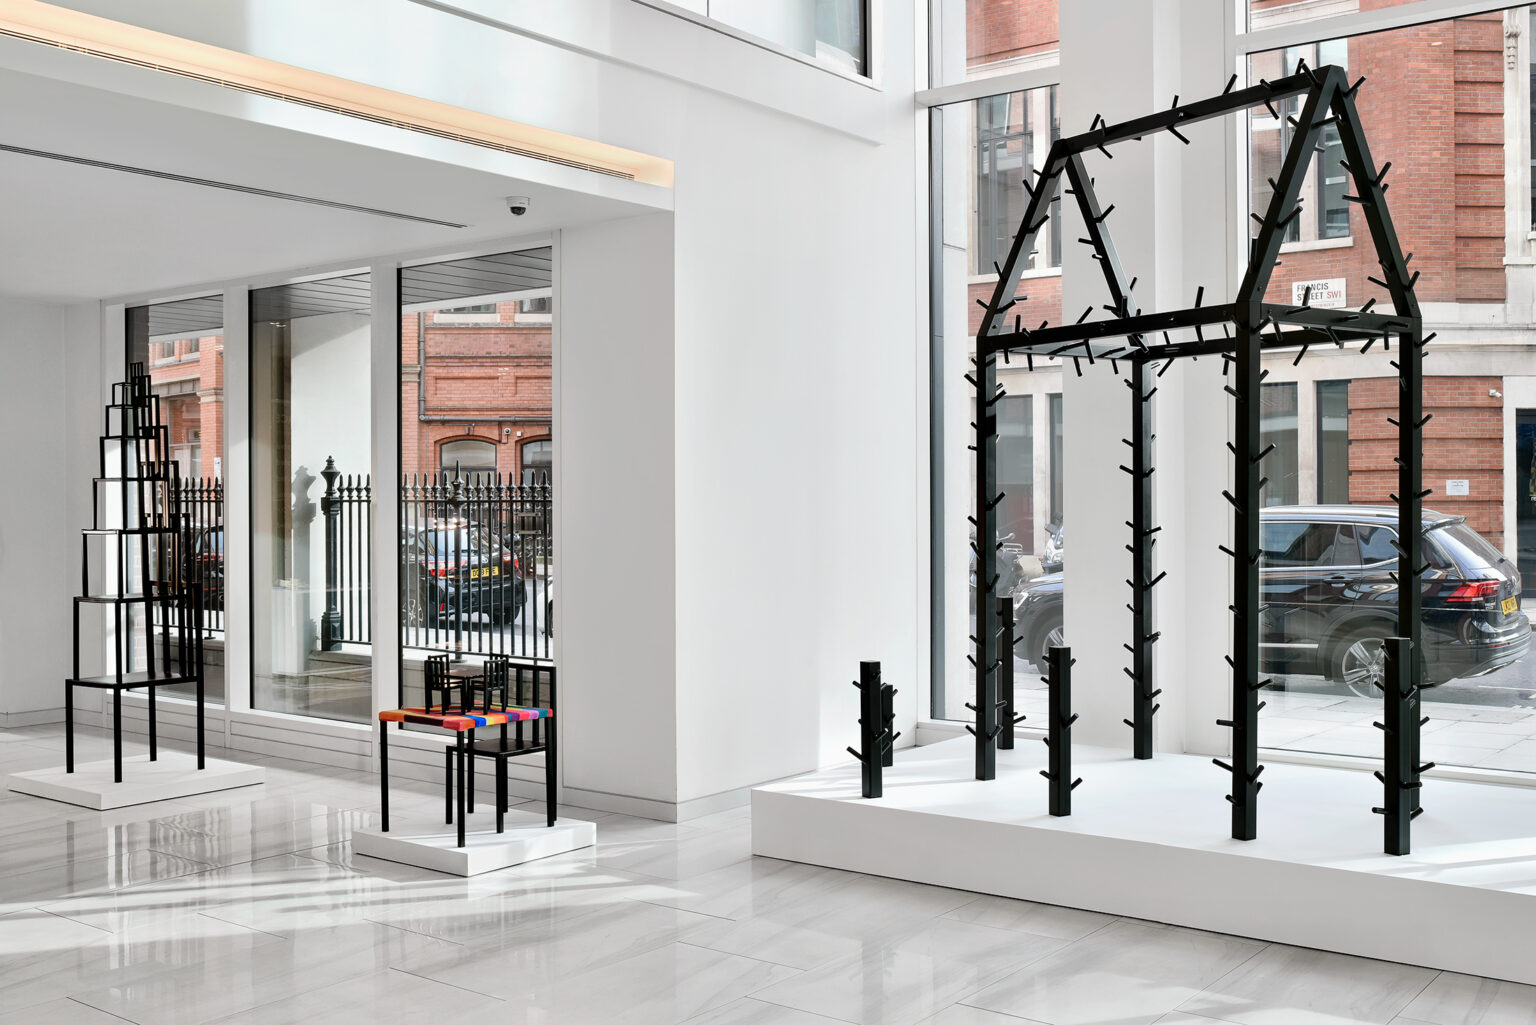 A windowed exhibition space with sculptures of black beams forming the outline of a house, with spikes on the outside of the beams